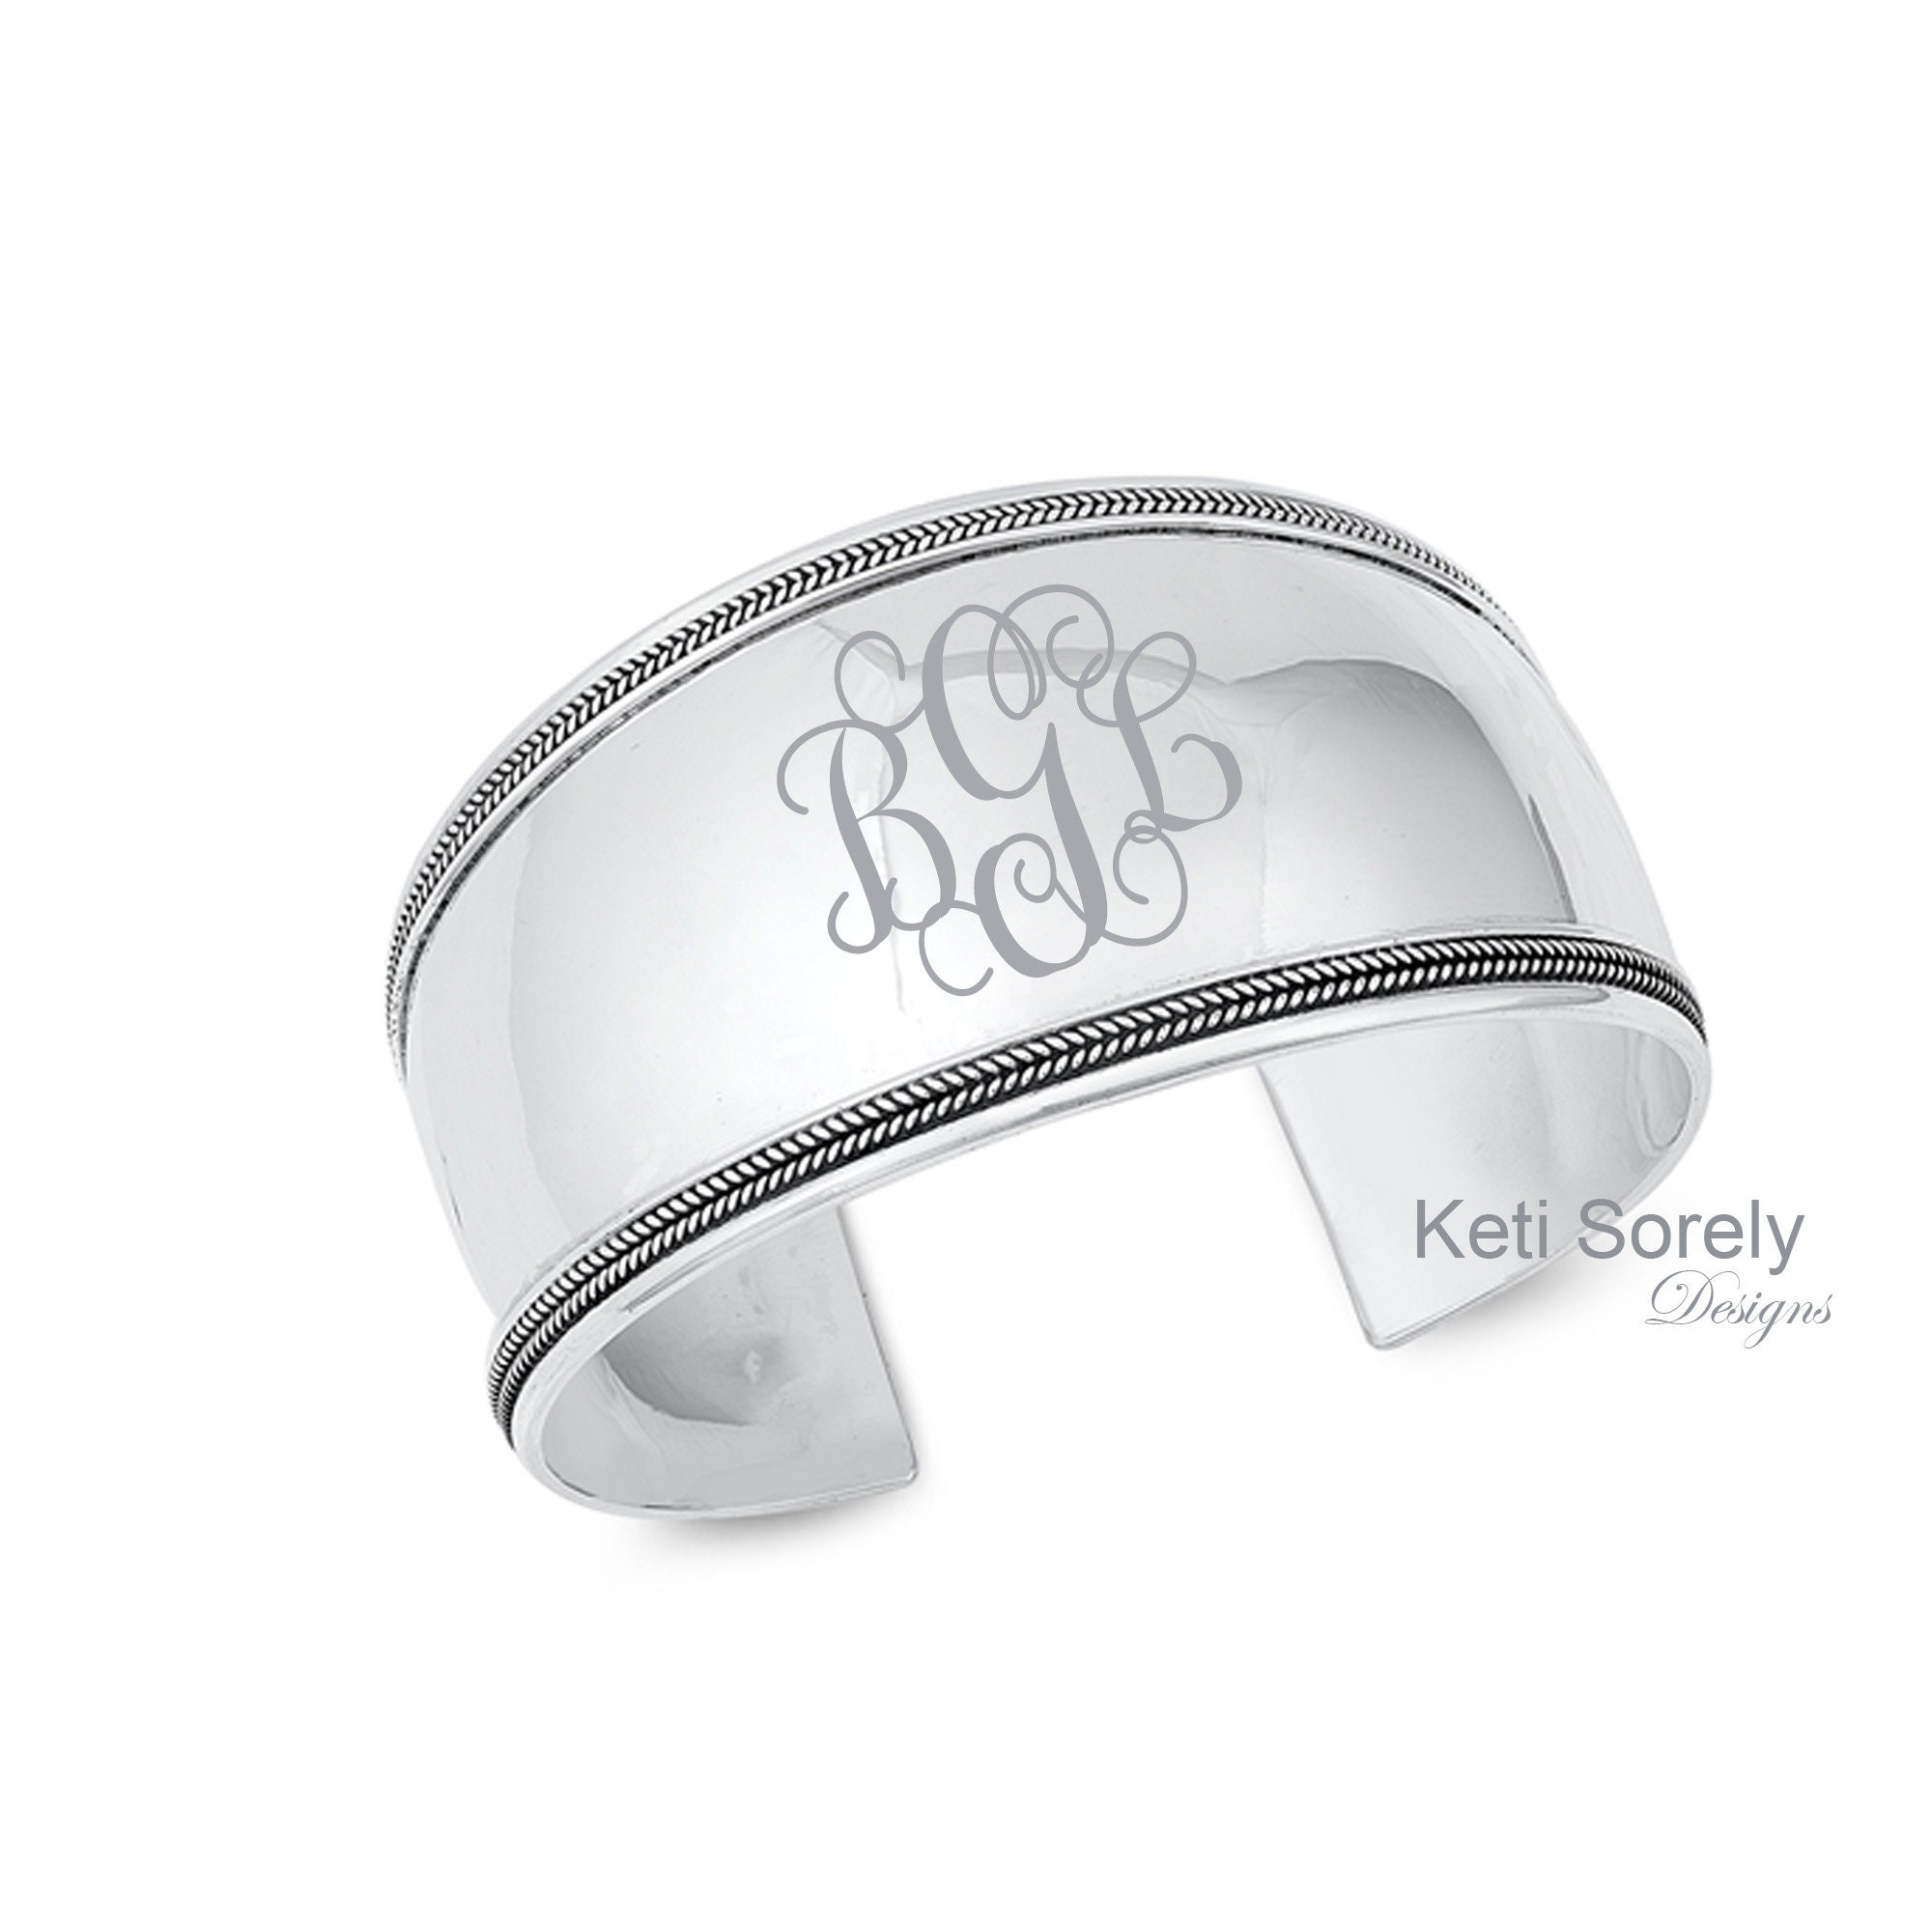 Sterling Silver Large Cuff Bangle With Engraved monogram Initials, Antiqued  Style Bangle with Ornaments.